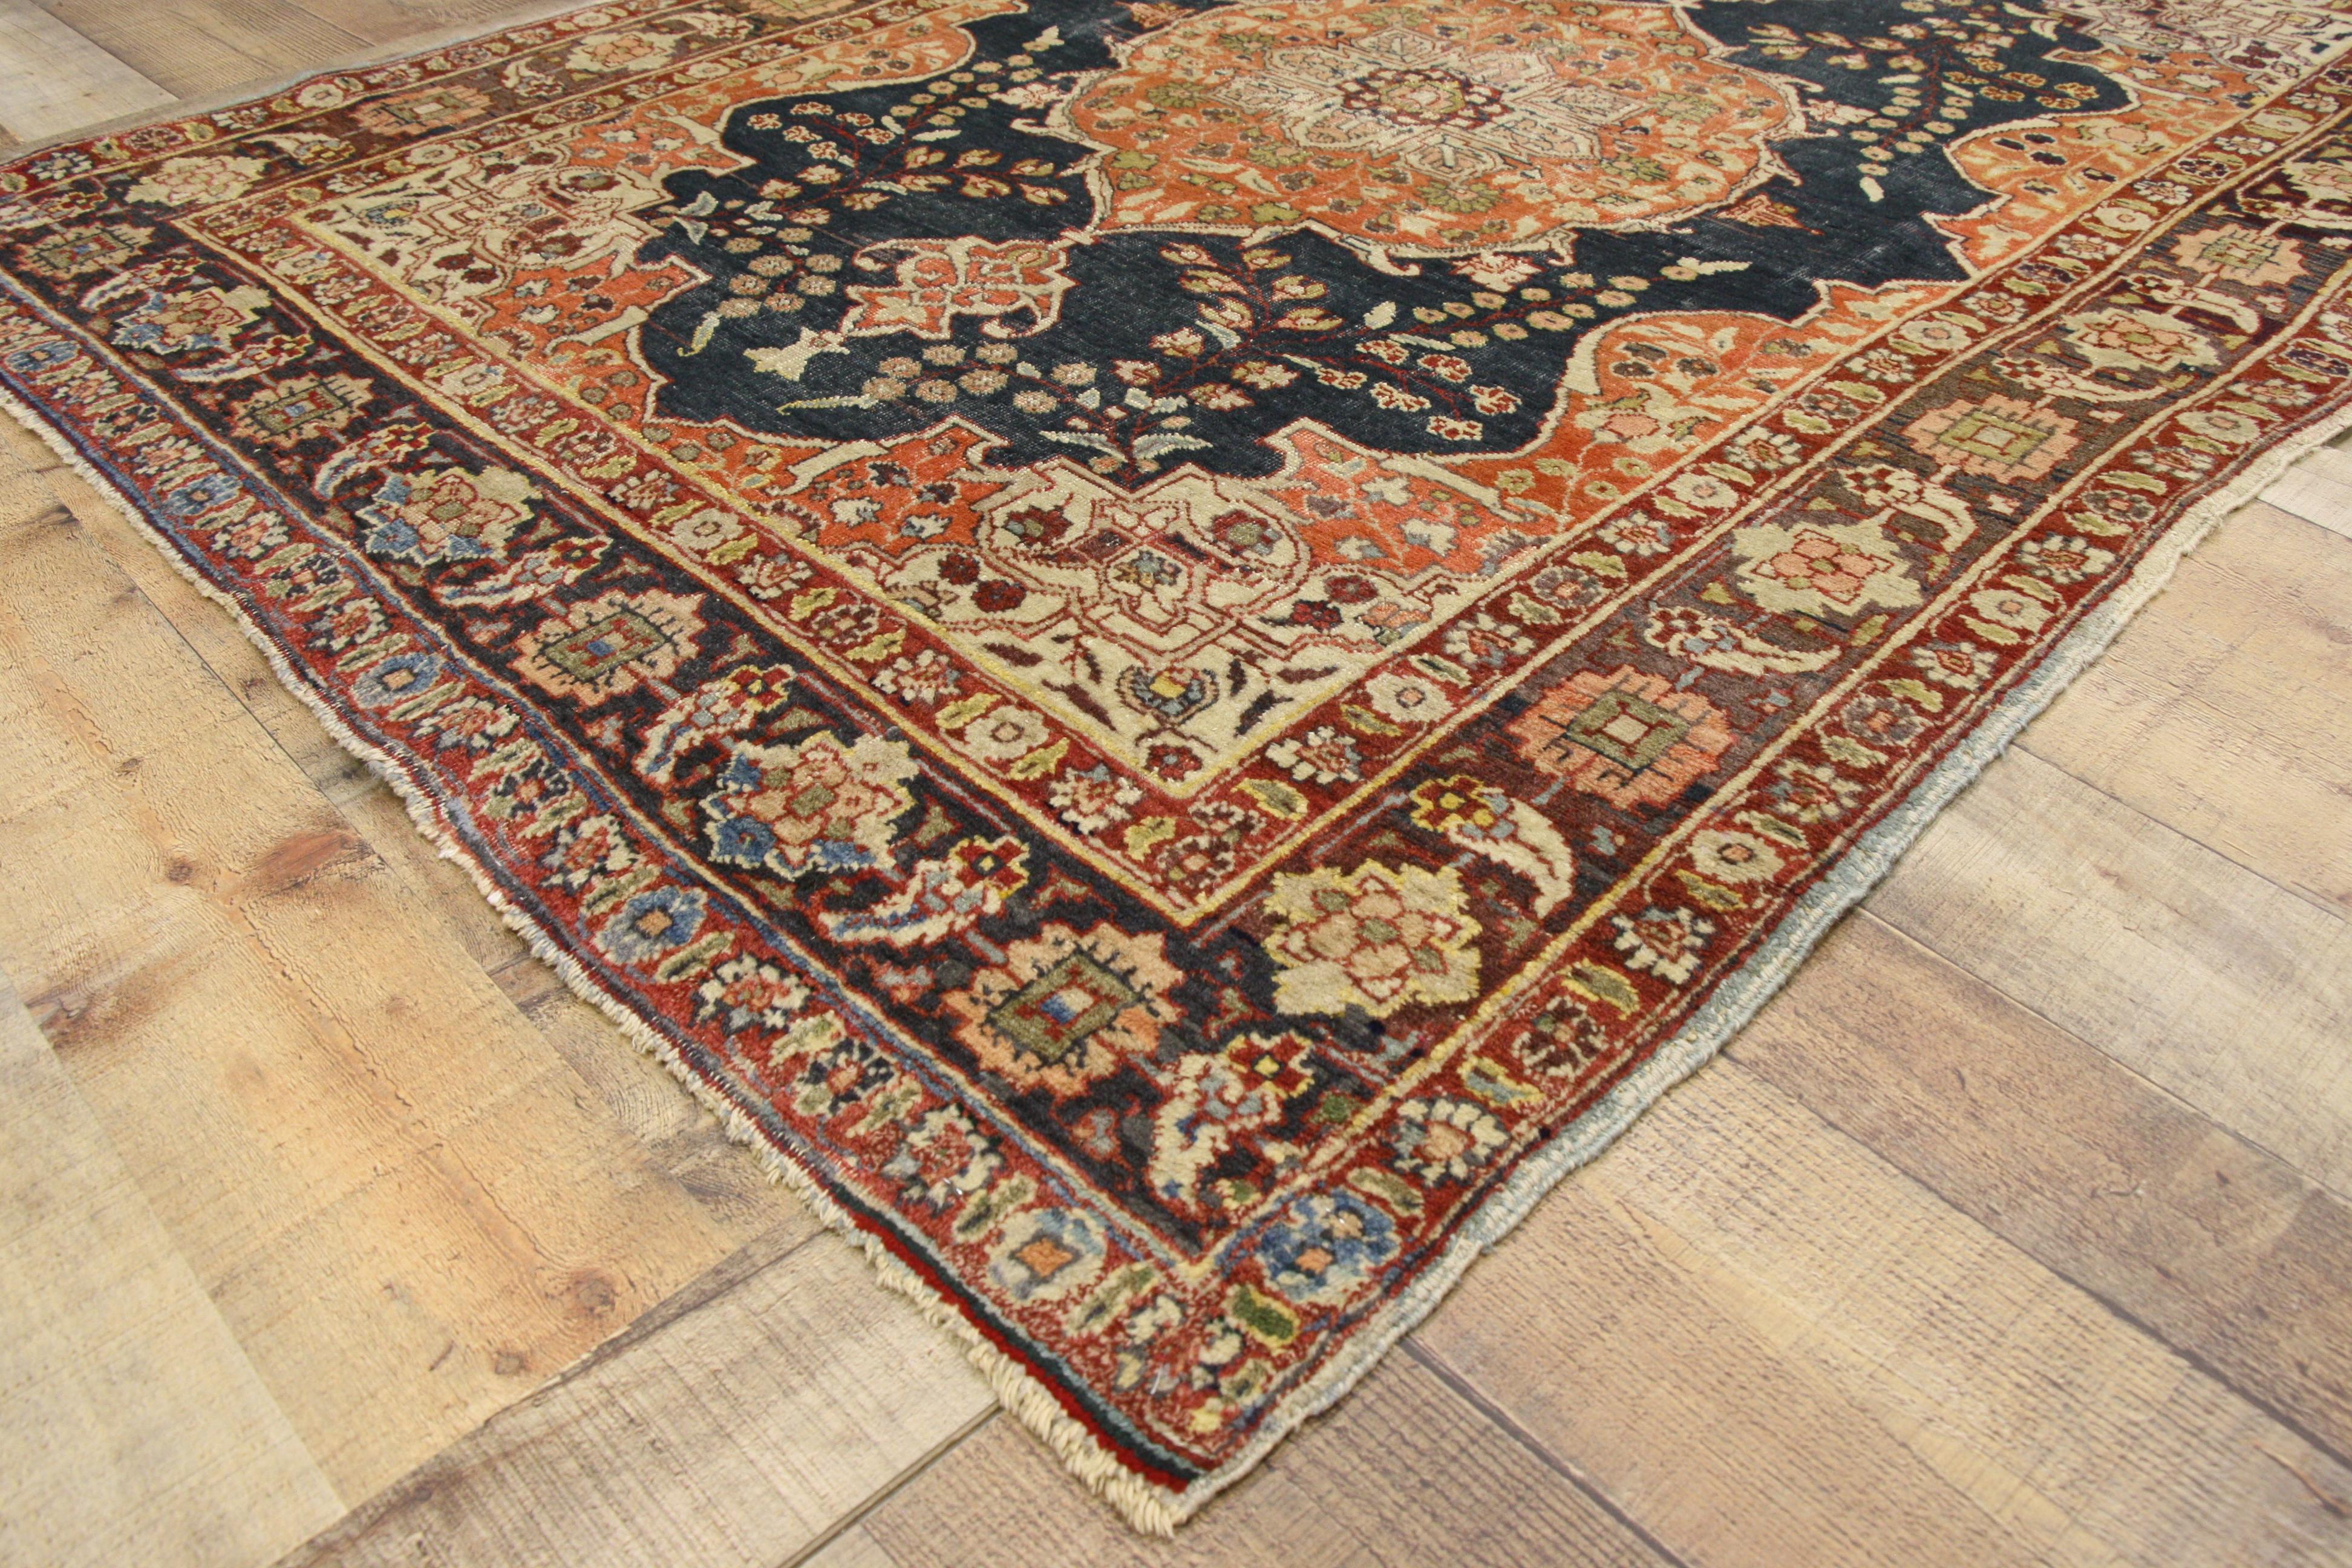 72936, rustic style antique Persian Tabriz accent rug for Kitchen, Foyer or Entry Rug. This hand knotted wool antique Persian Tabriz accent rug features an orange cusped medallion with cartouche finials at each side flanked by blossoming vines on a